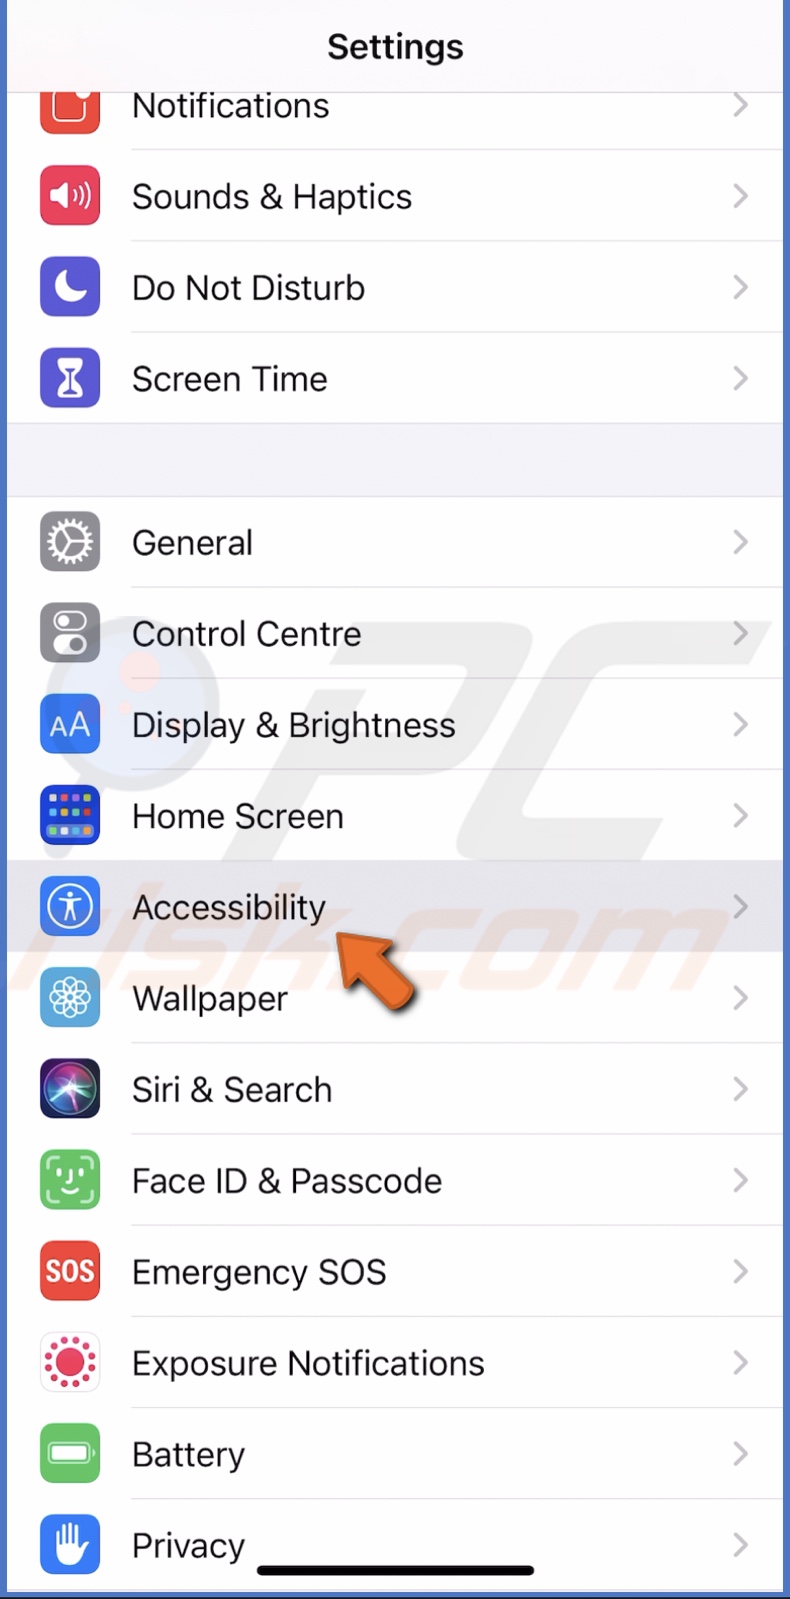 Go to Accessibility settings